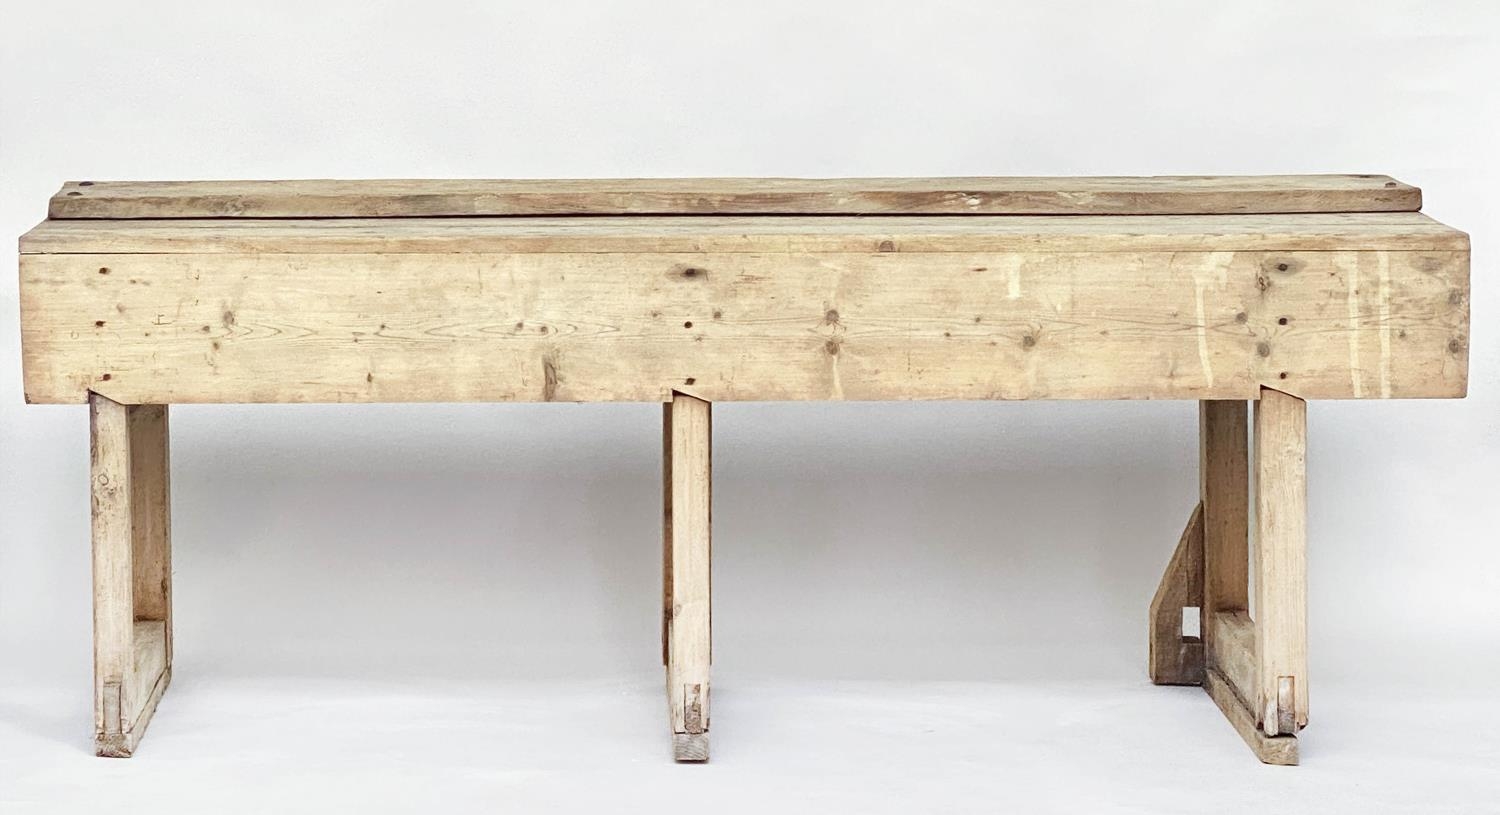 WORK BENCH, vintage/early 20th century broad planked pine, 211cm x 62cm x 80cm H. - Image 3 of 8